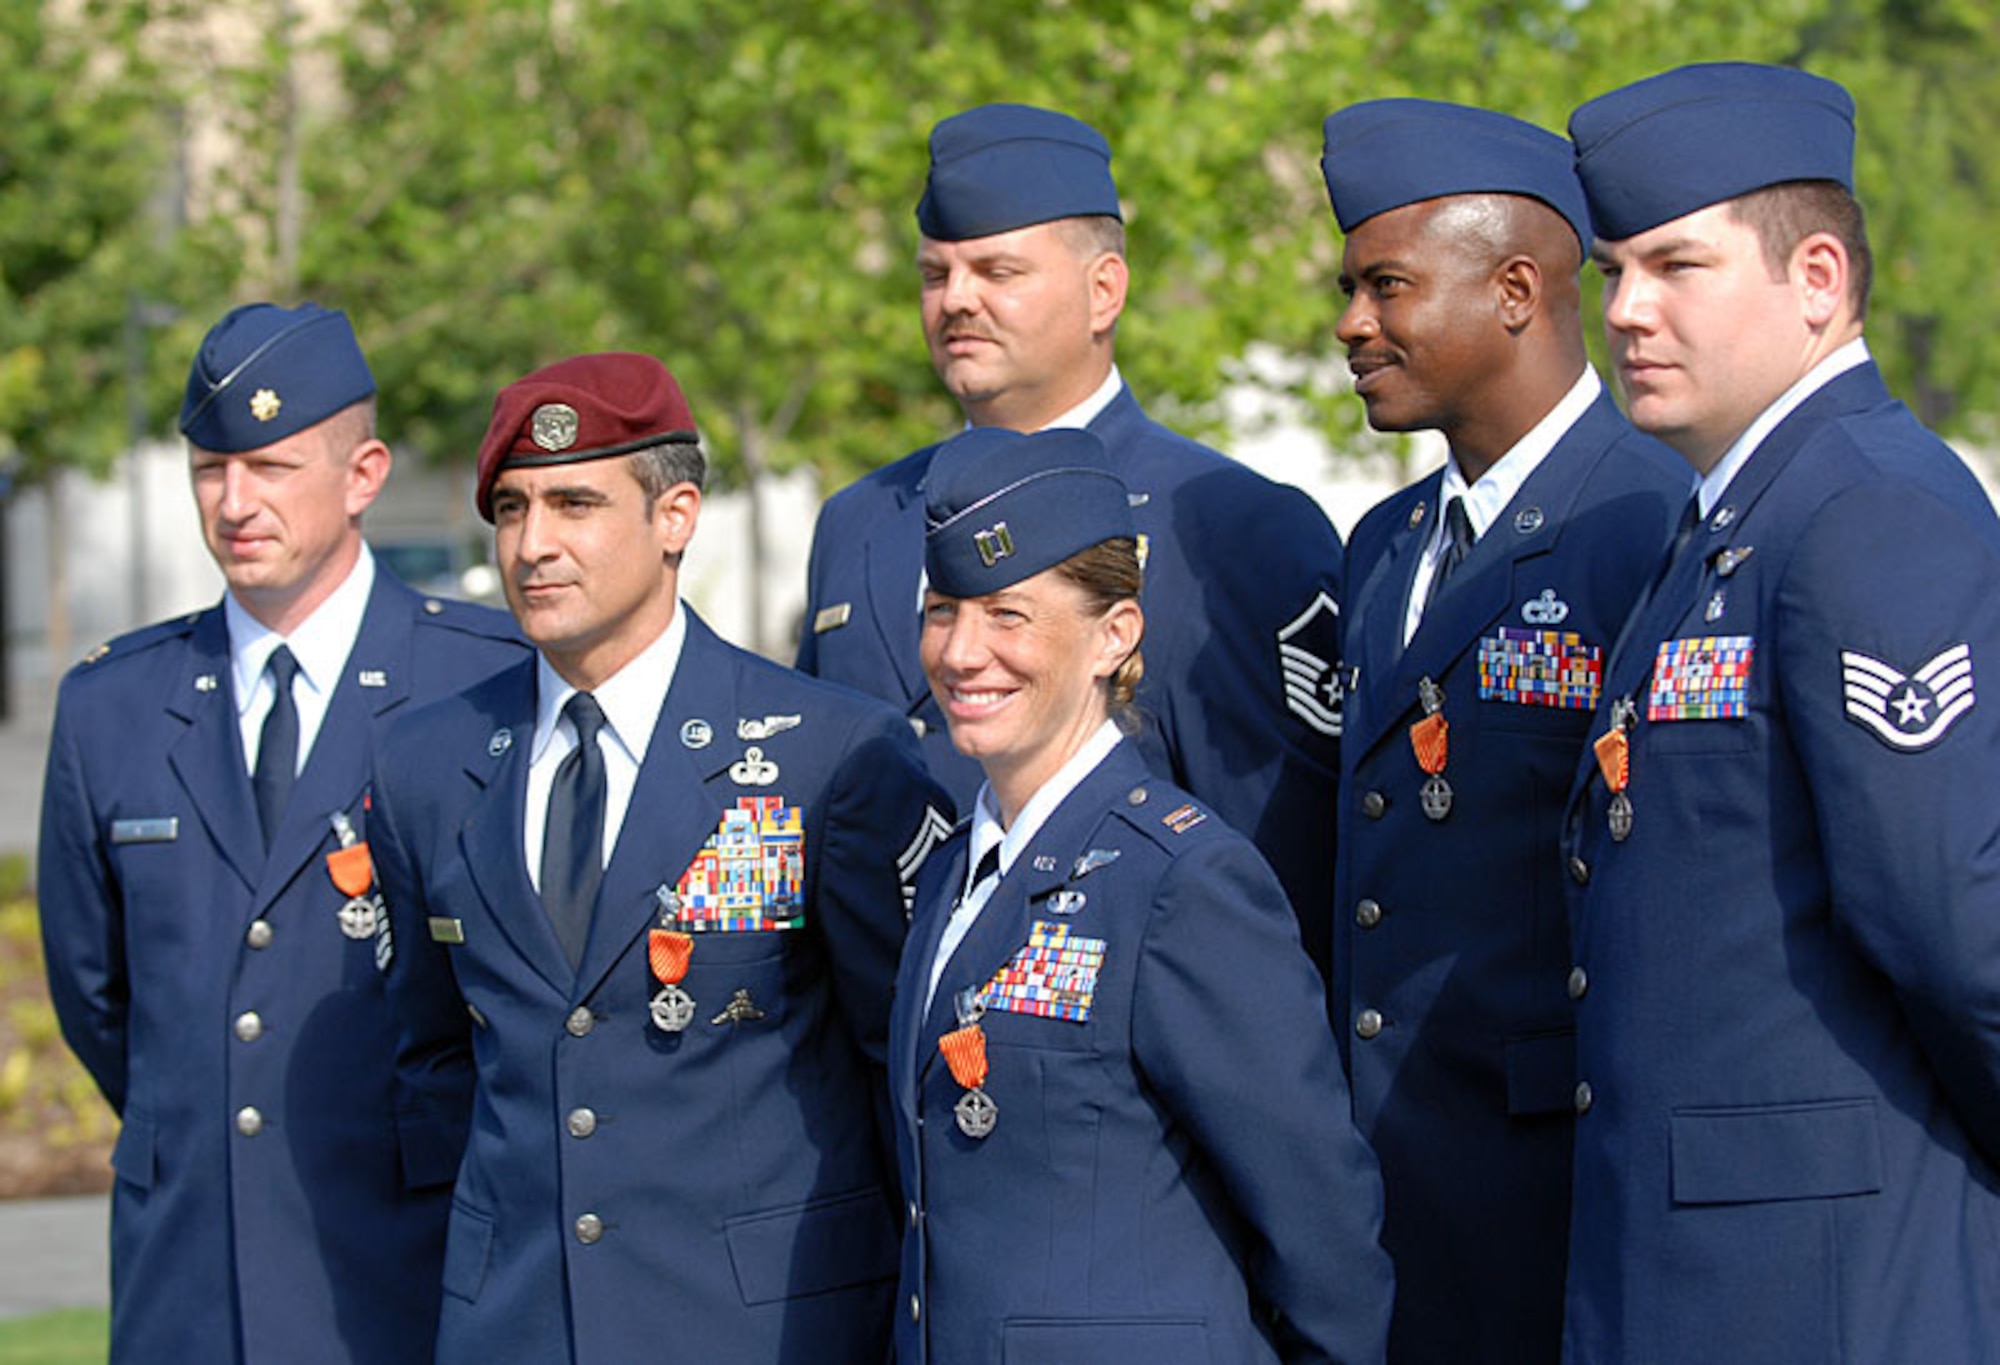 The first Combat Action Medals were awarded to six Airmen on June 12, 2007. (Front row, left to right): Maj. Steven Raspet, Senior Master Sgt. Ramon Colon-Lopez, Capt. Allison Black. Back row, left to right: Master Sgt. Byron Allen, Master Sgt. Charlie Peterson, Staff Sgt. Daniel Paxton. (U.S. Air Force photo)